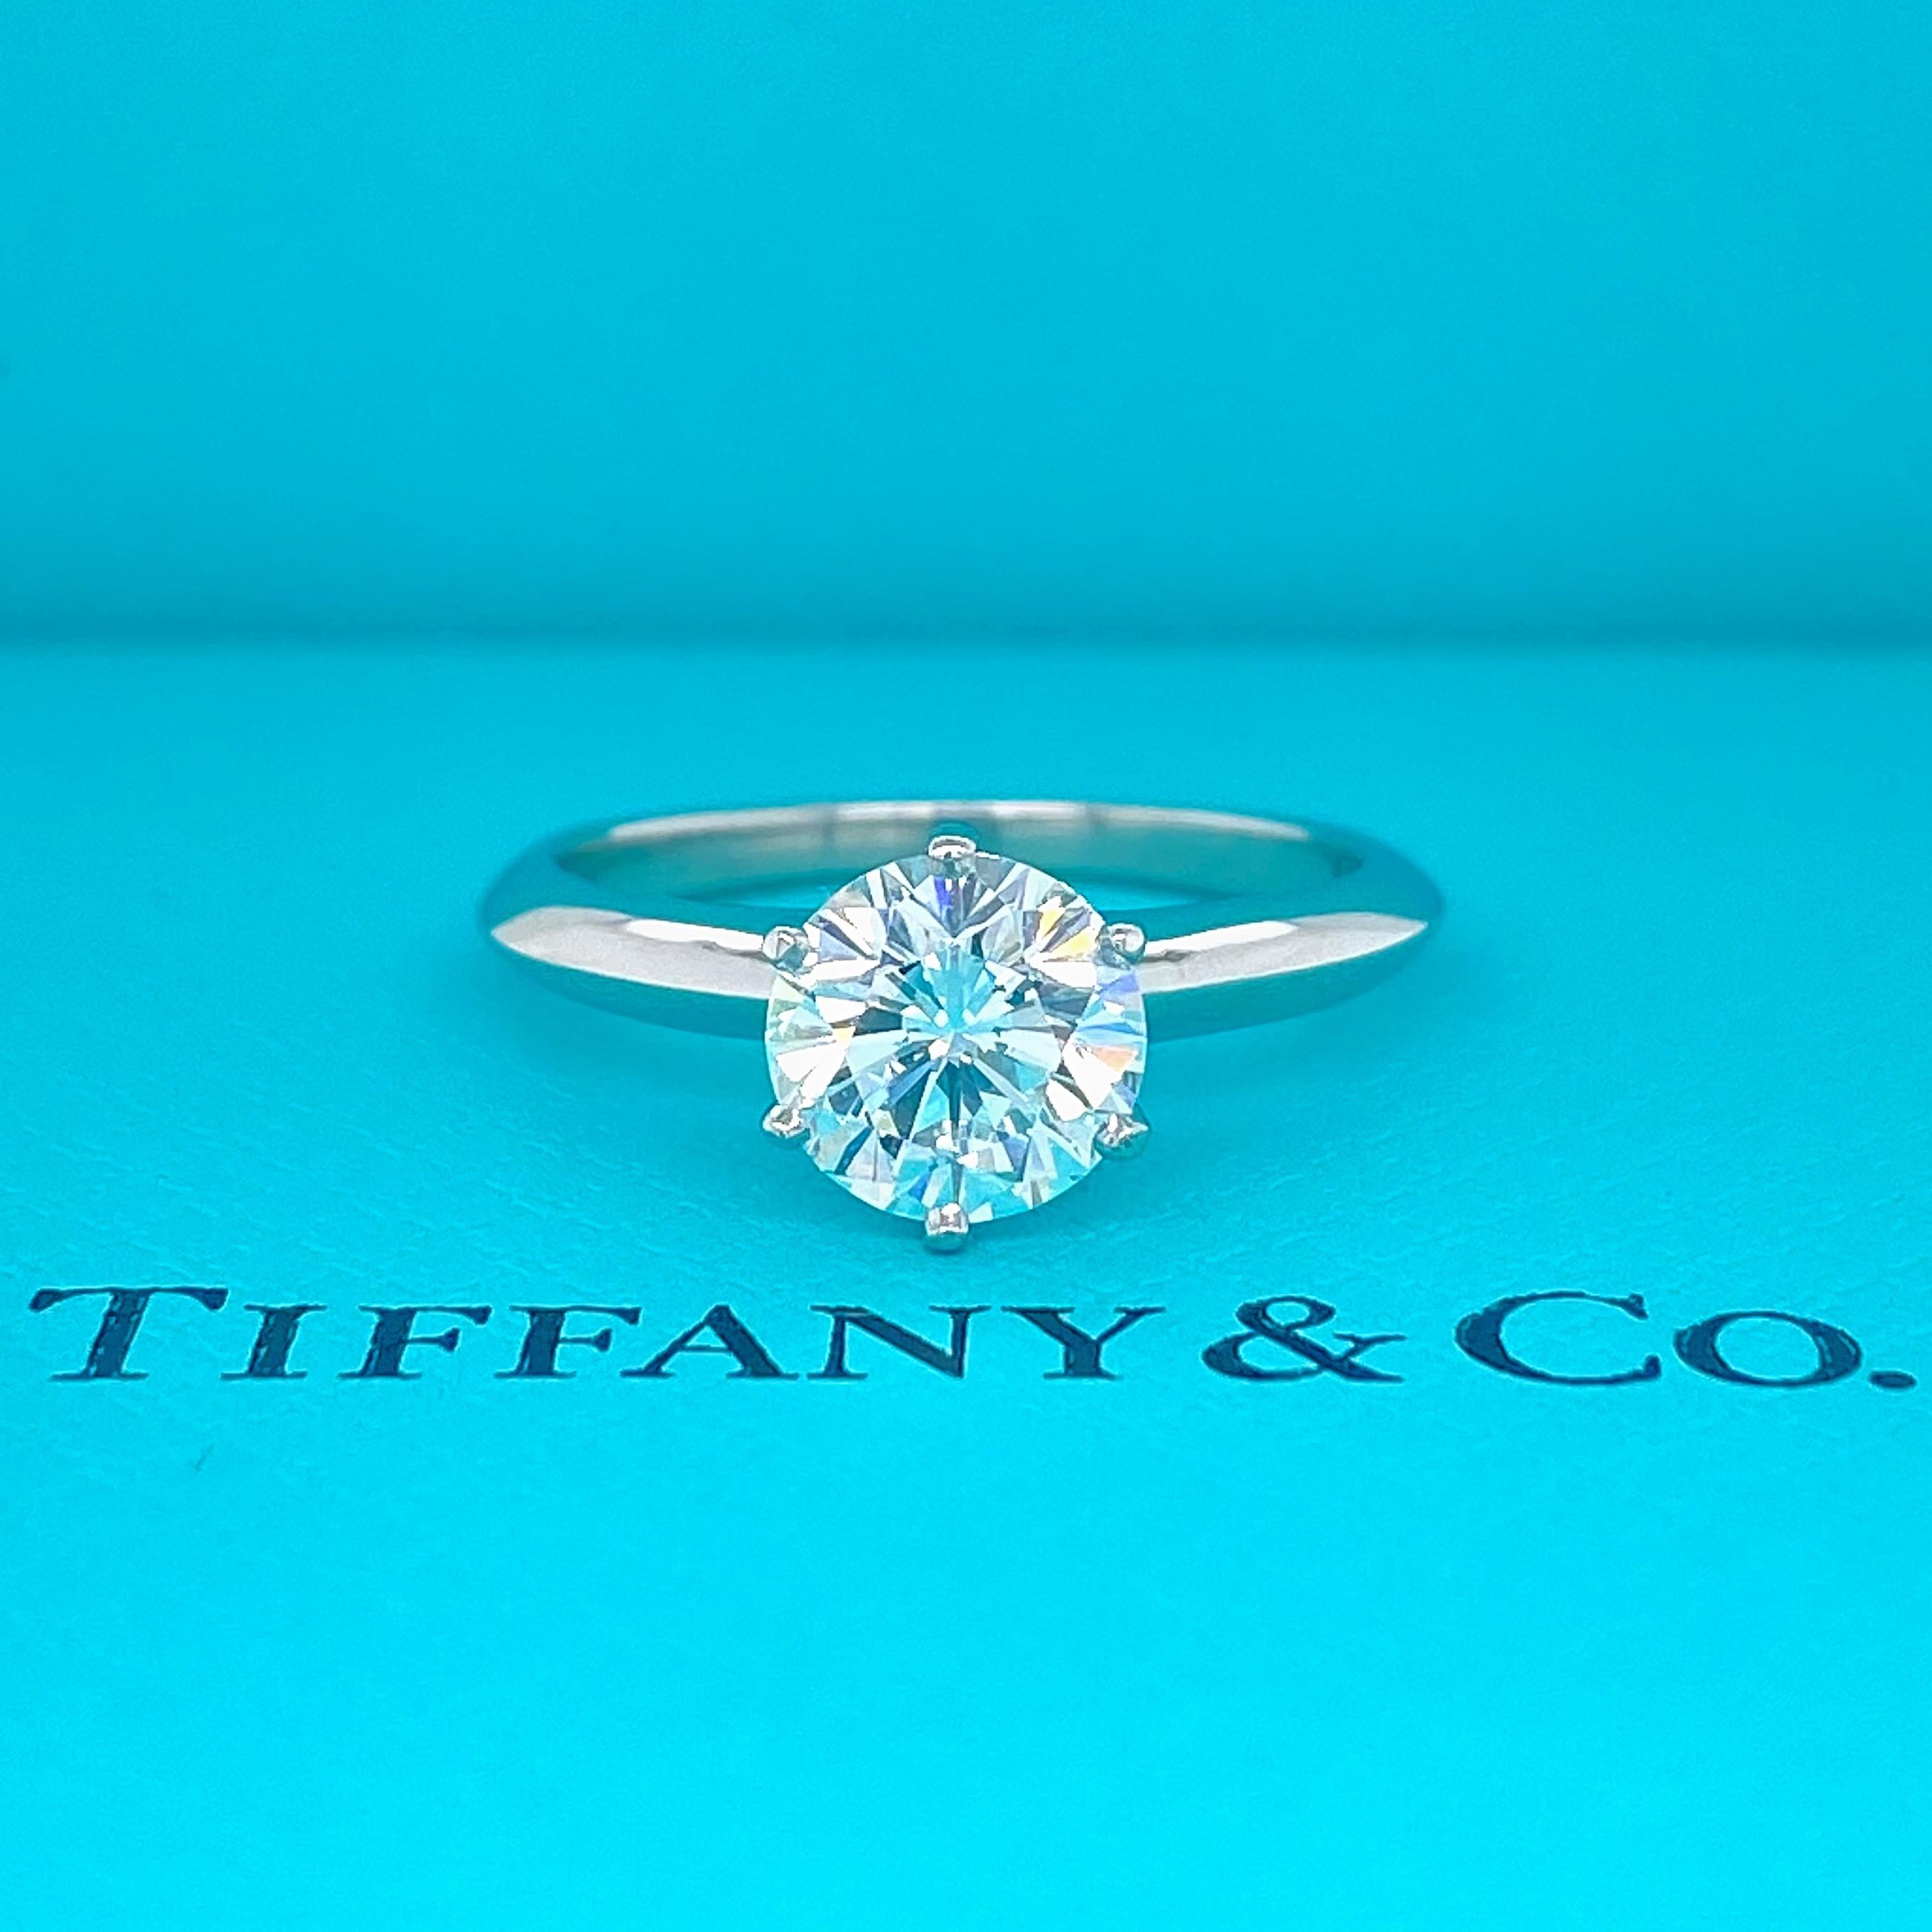 Tiffany & Co Solitaire Engagement Ring
Style:  Classic 6-Prong 
Ref. number:  D48268
Metal:  Platinum PT950
GIA:  11041985
Size:  5.75 sizable
TCW:  1.31 cts
Main Diamond:  Round Brilliant Cut
Color & Clarity:  E / VS1 
Hallmark:  TIFFSNY&CO. PT950 